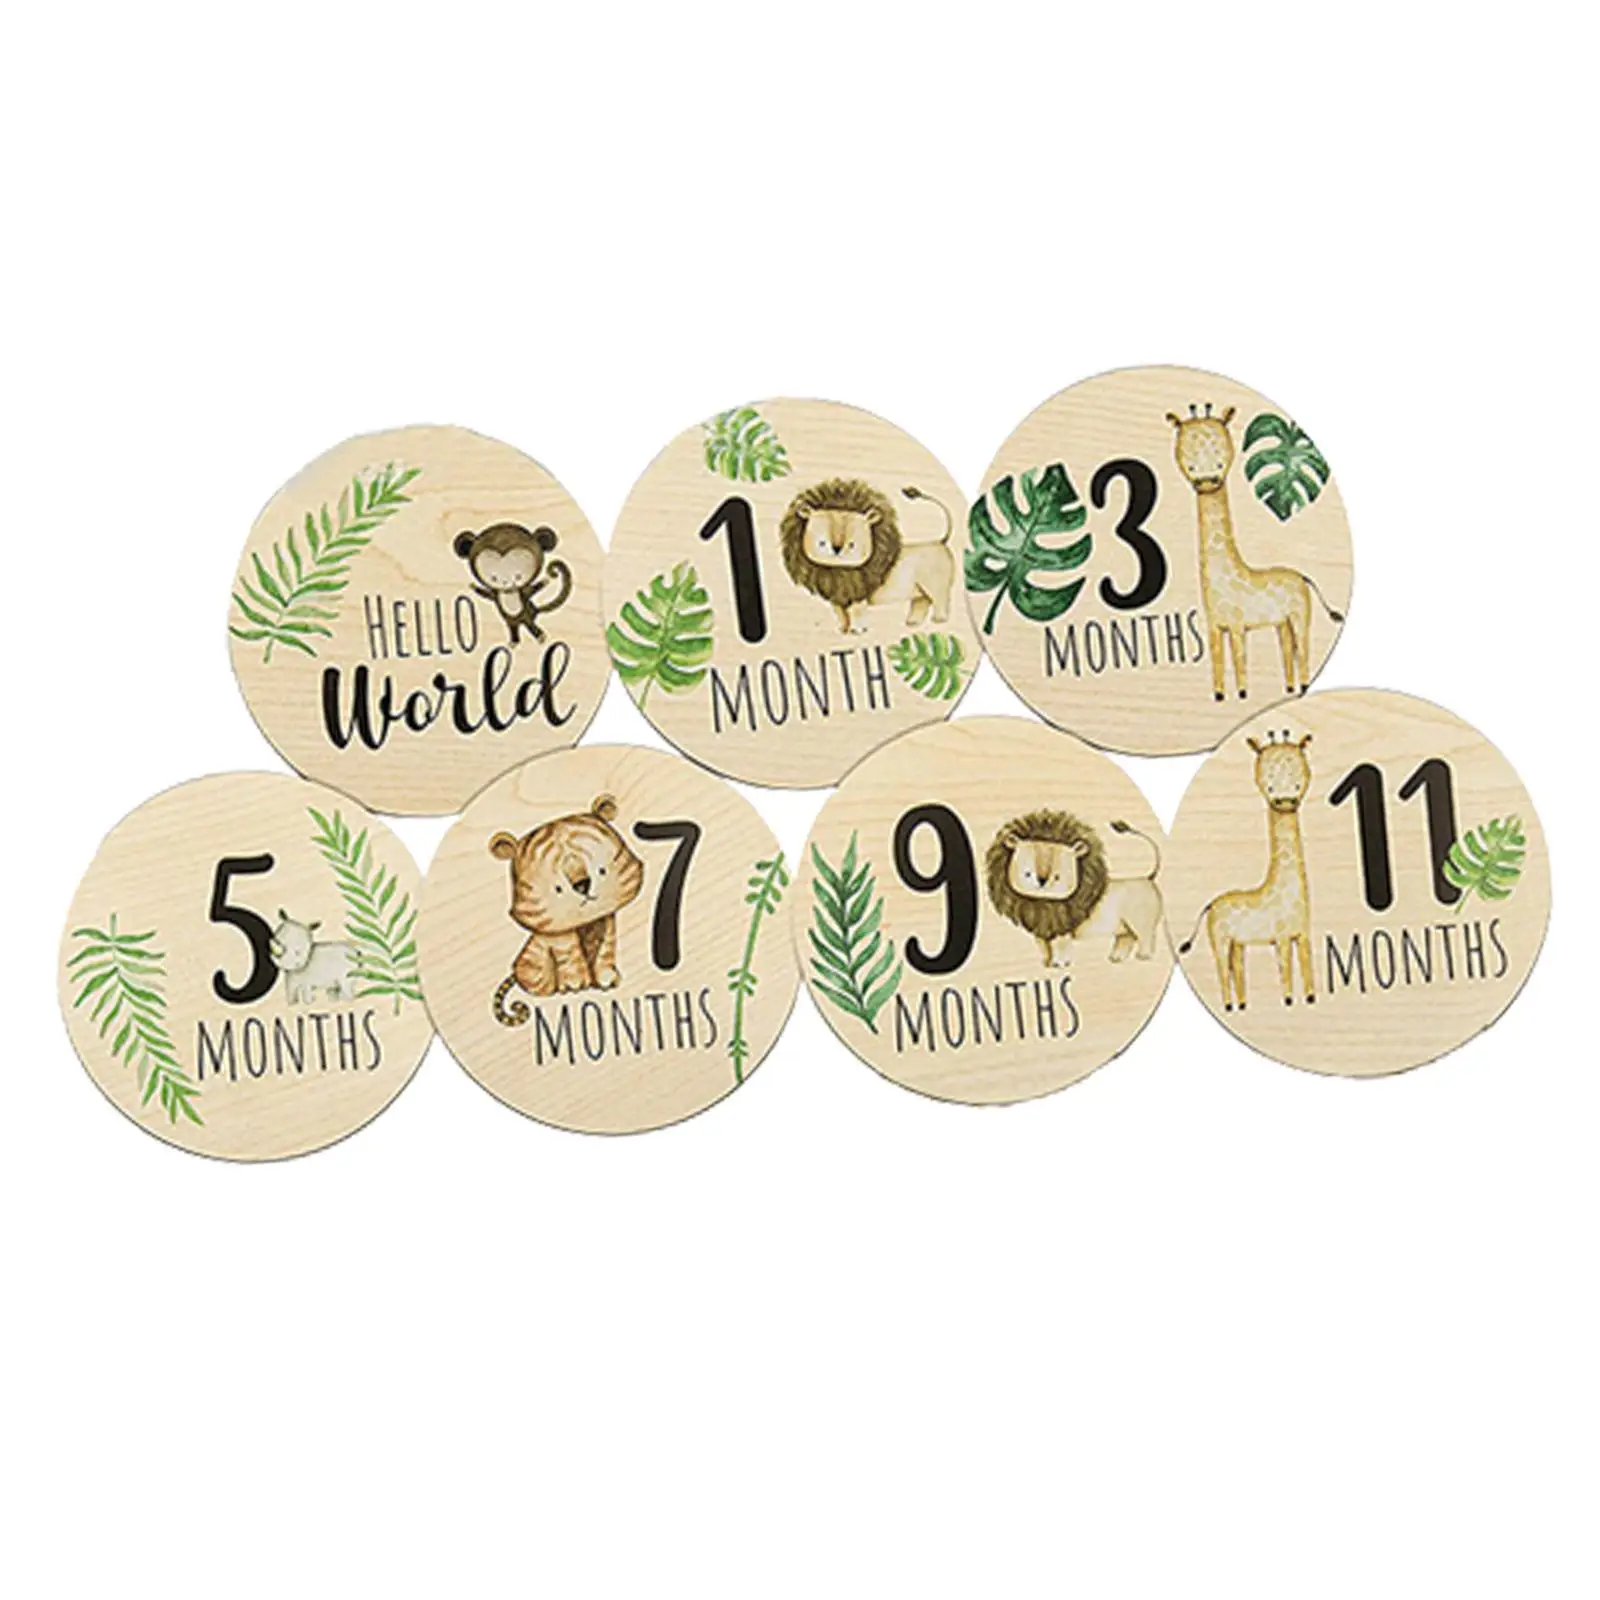 7x Baby Milestone Cards Baby Months Signs Double Sided Round Discs for Baby Shower Baby Growth Newborn Photo Props New Mom Gifts